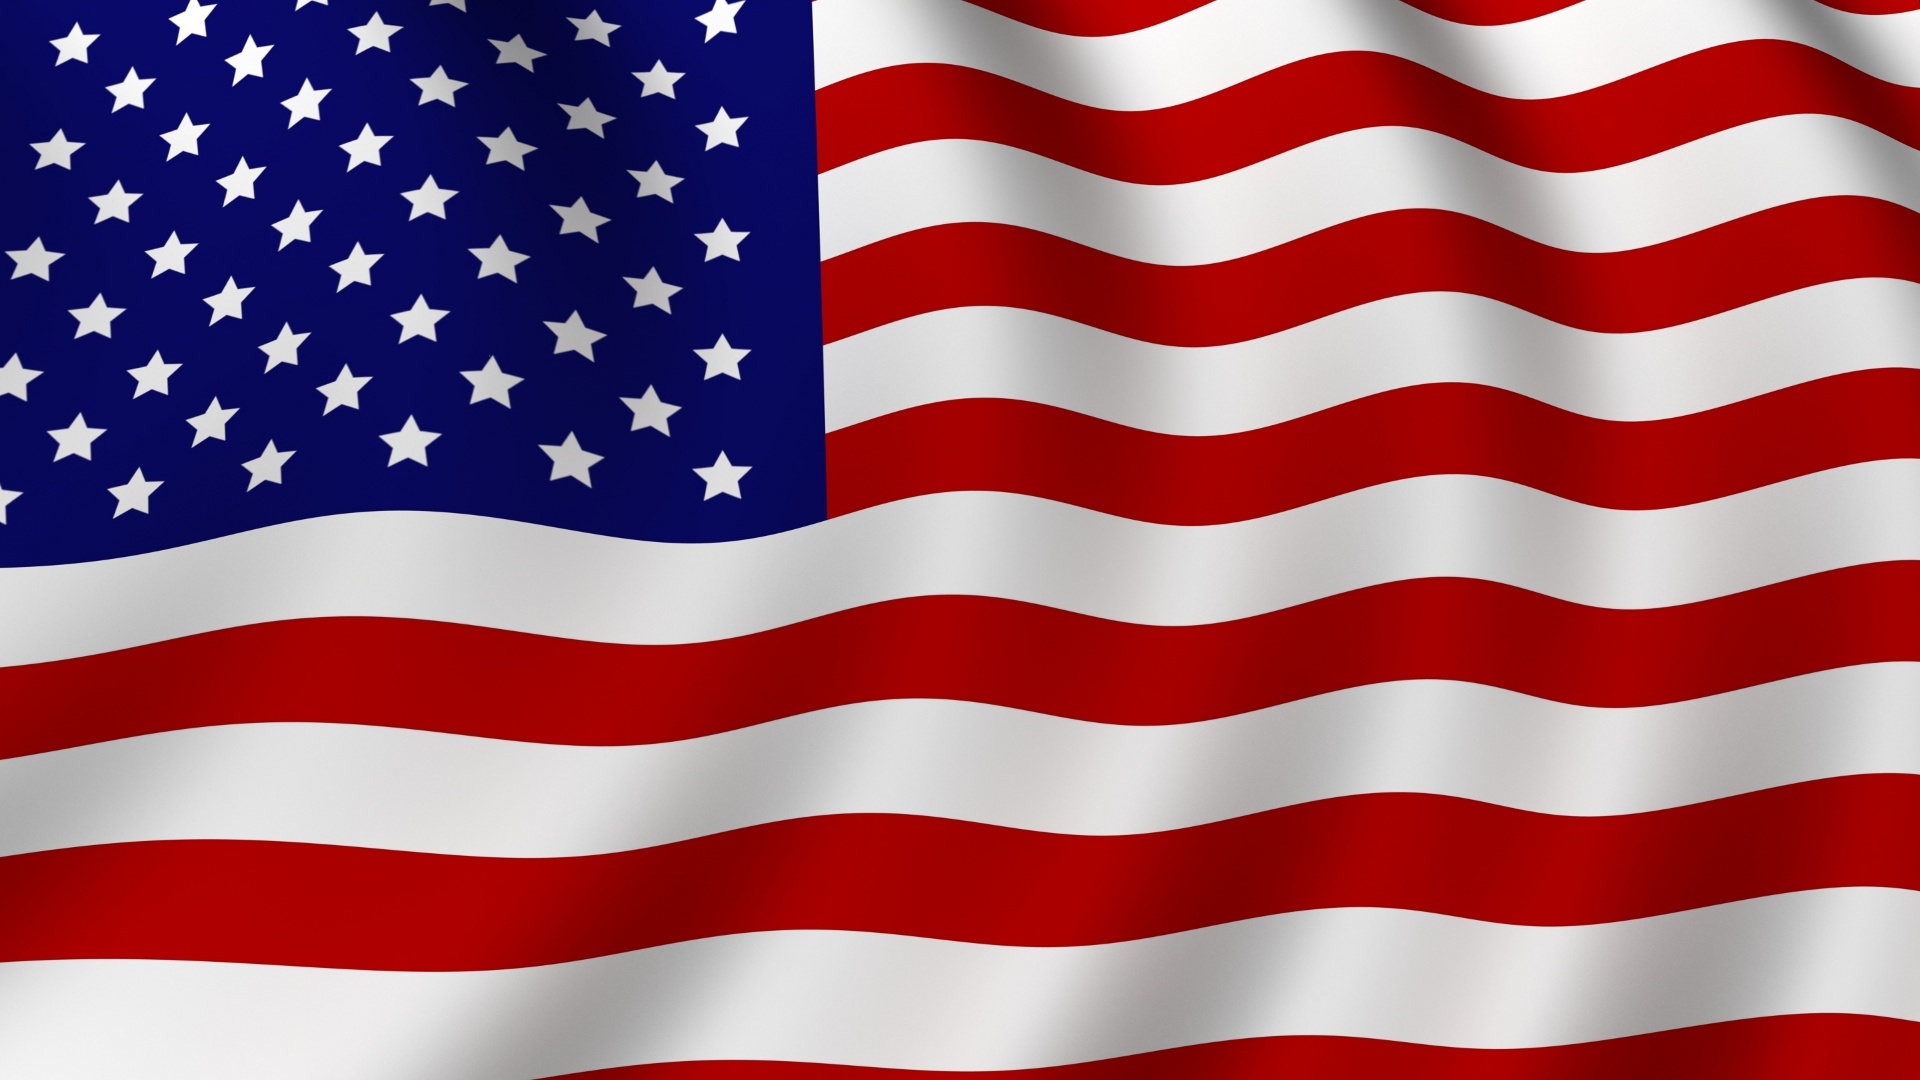 flag background wallpapers wallpaper 1920x1080